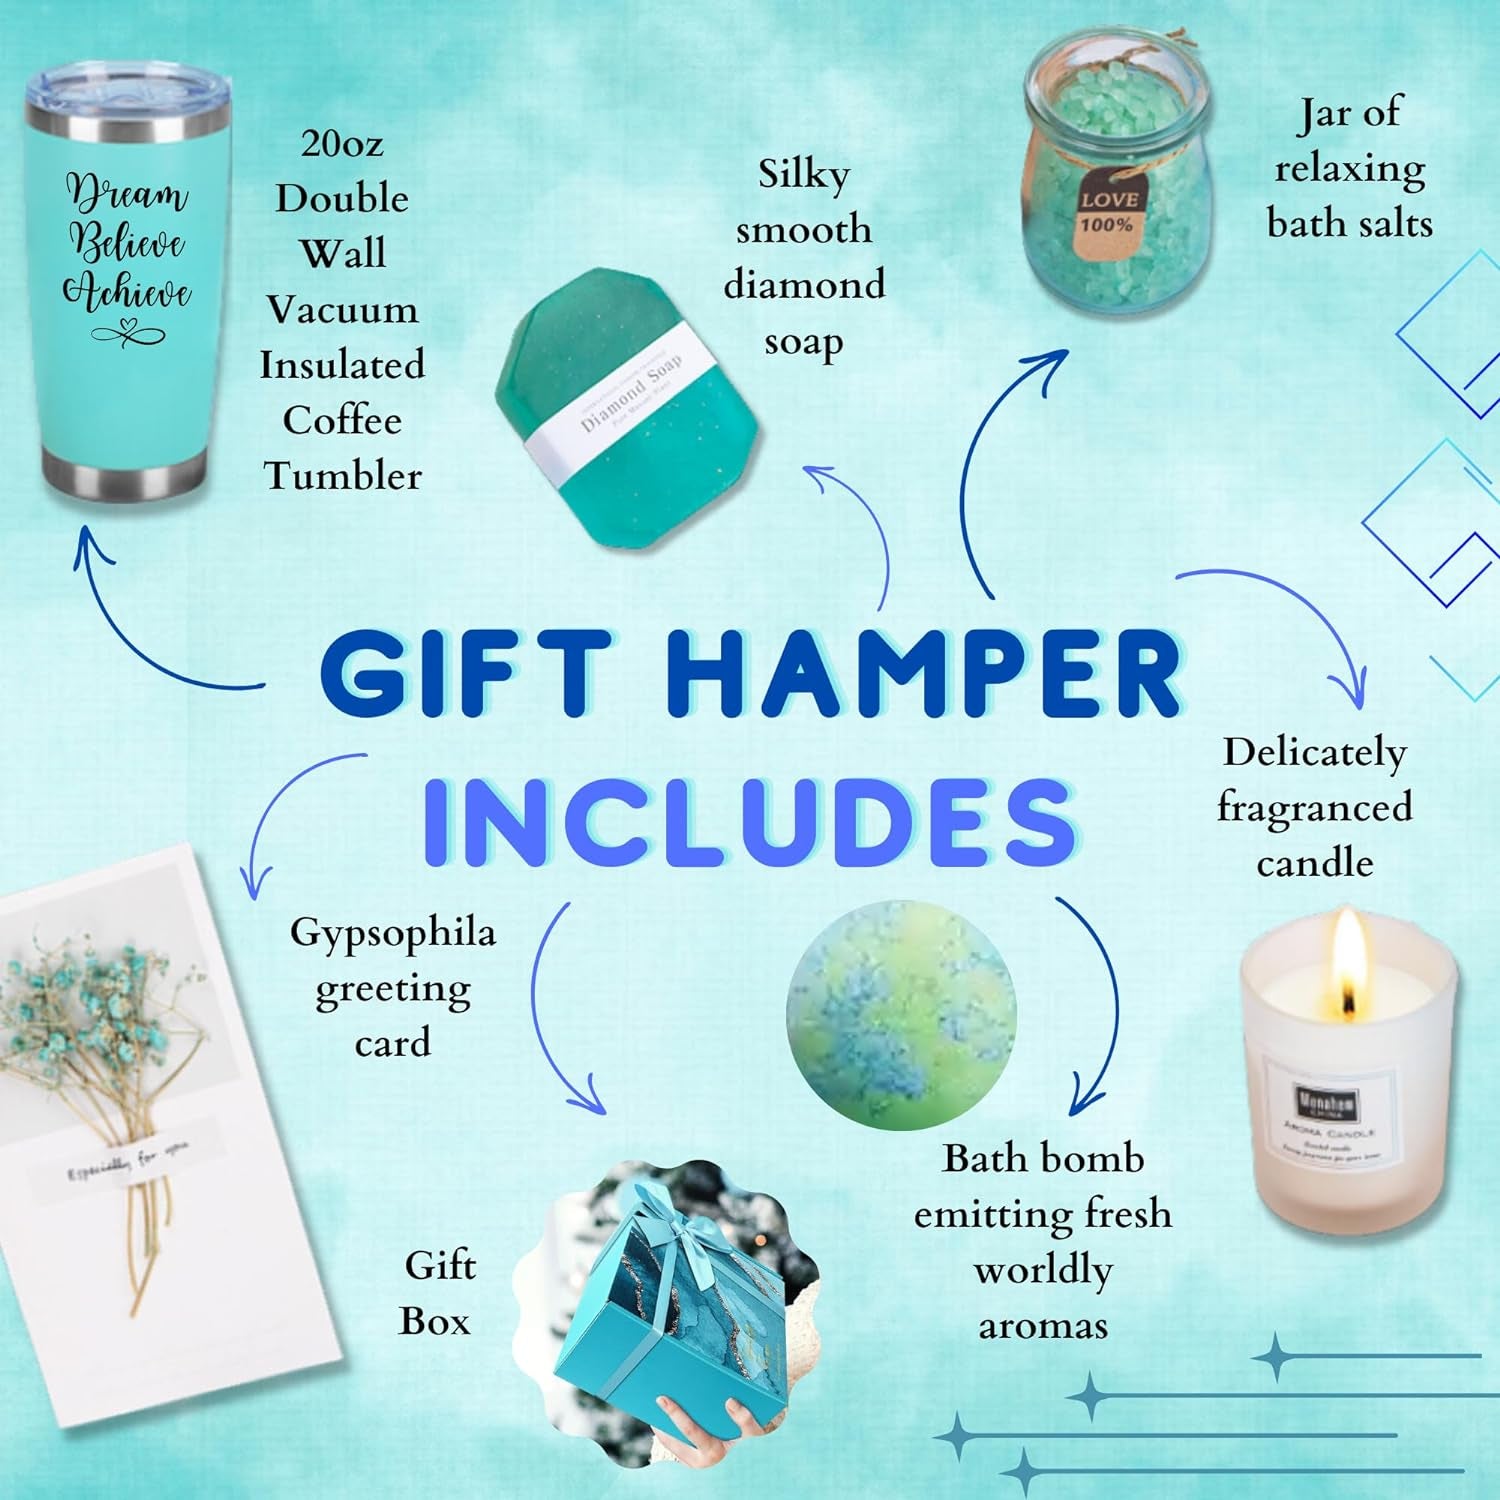 Pamper Gift Box Set for Women (7 Items) - Unique Self Care Package Relaxation Spa Bath Set for Her, Wellbeing Get Well Soon Gifts for Women, Ladies Gifts Thank You Gifts Pamper Gifts for Women